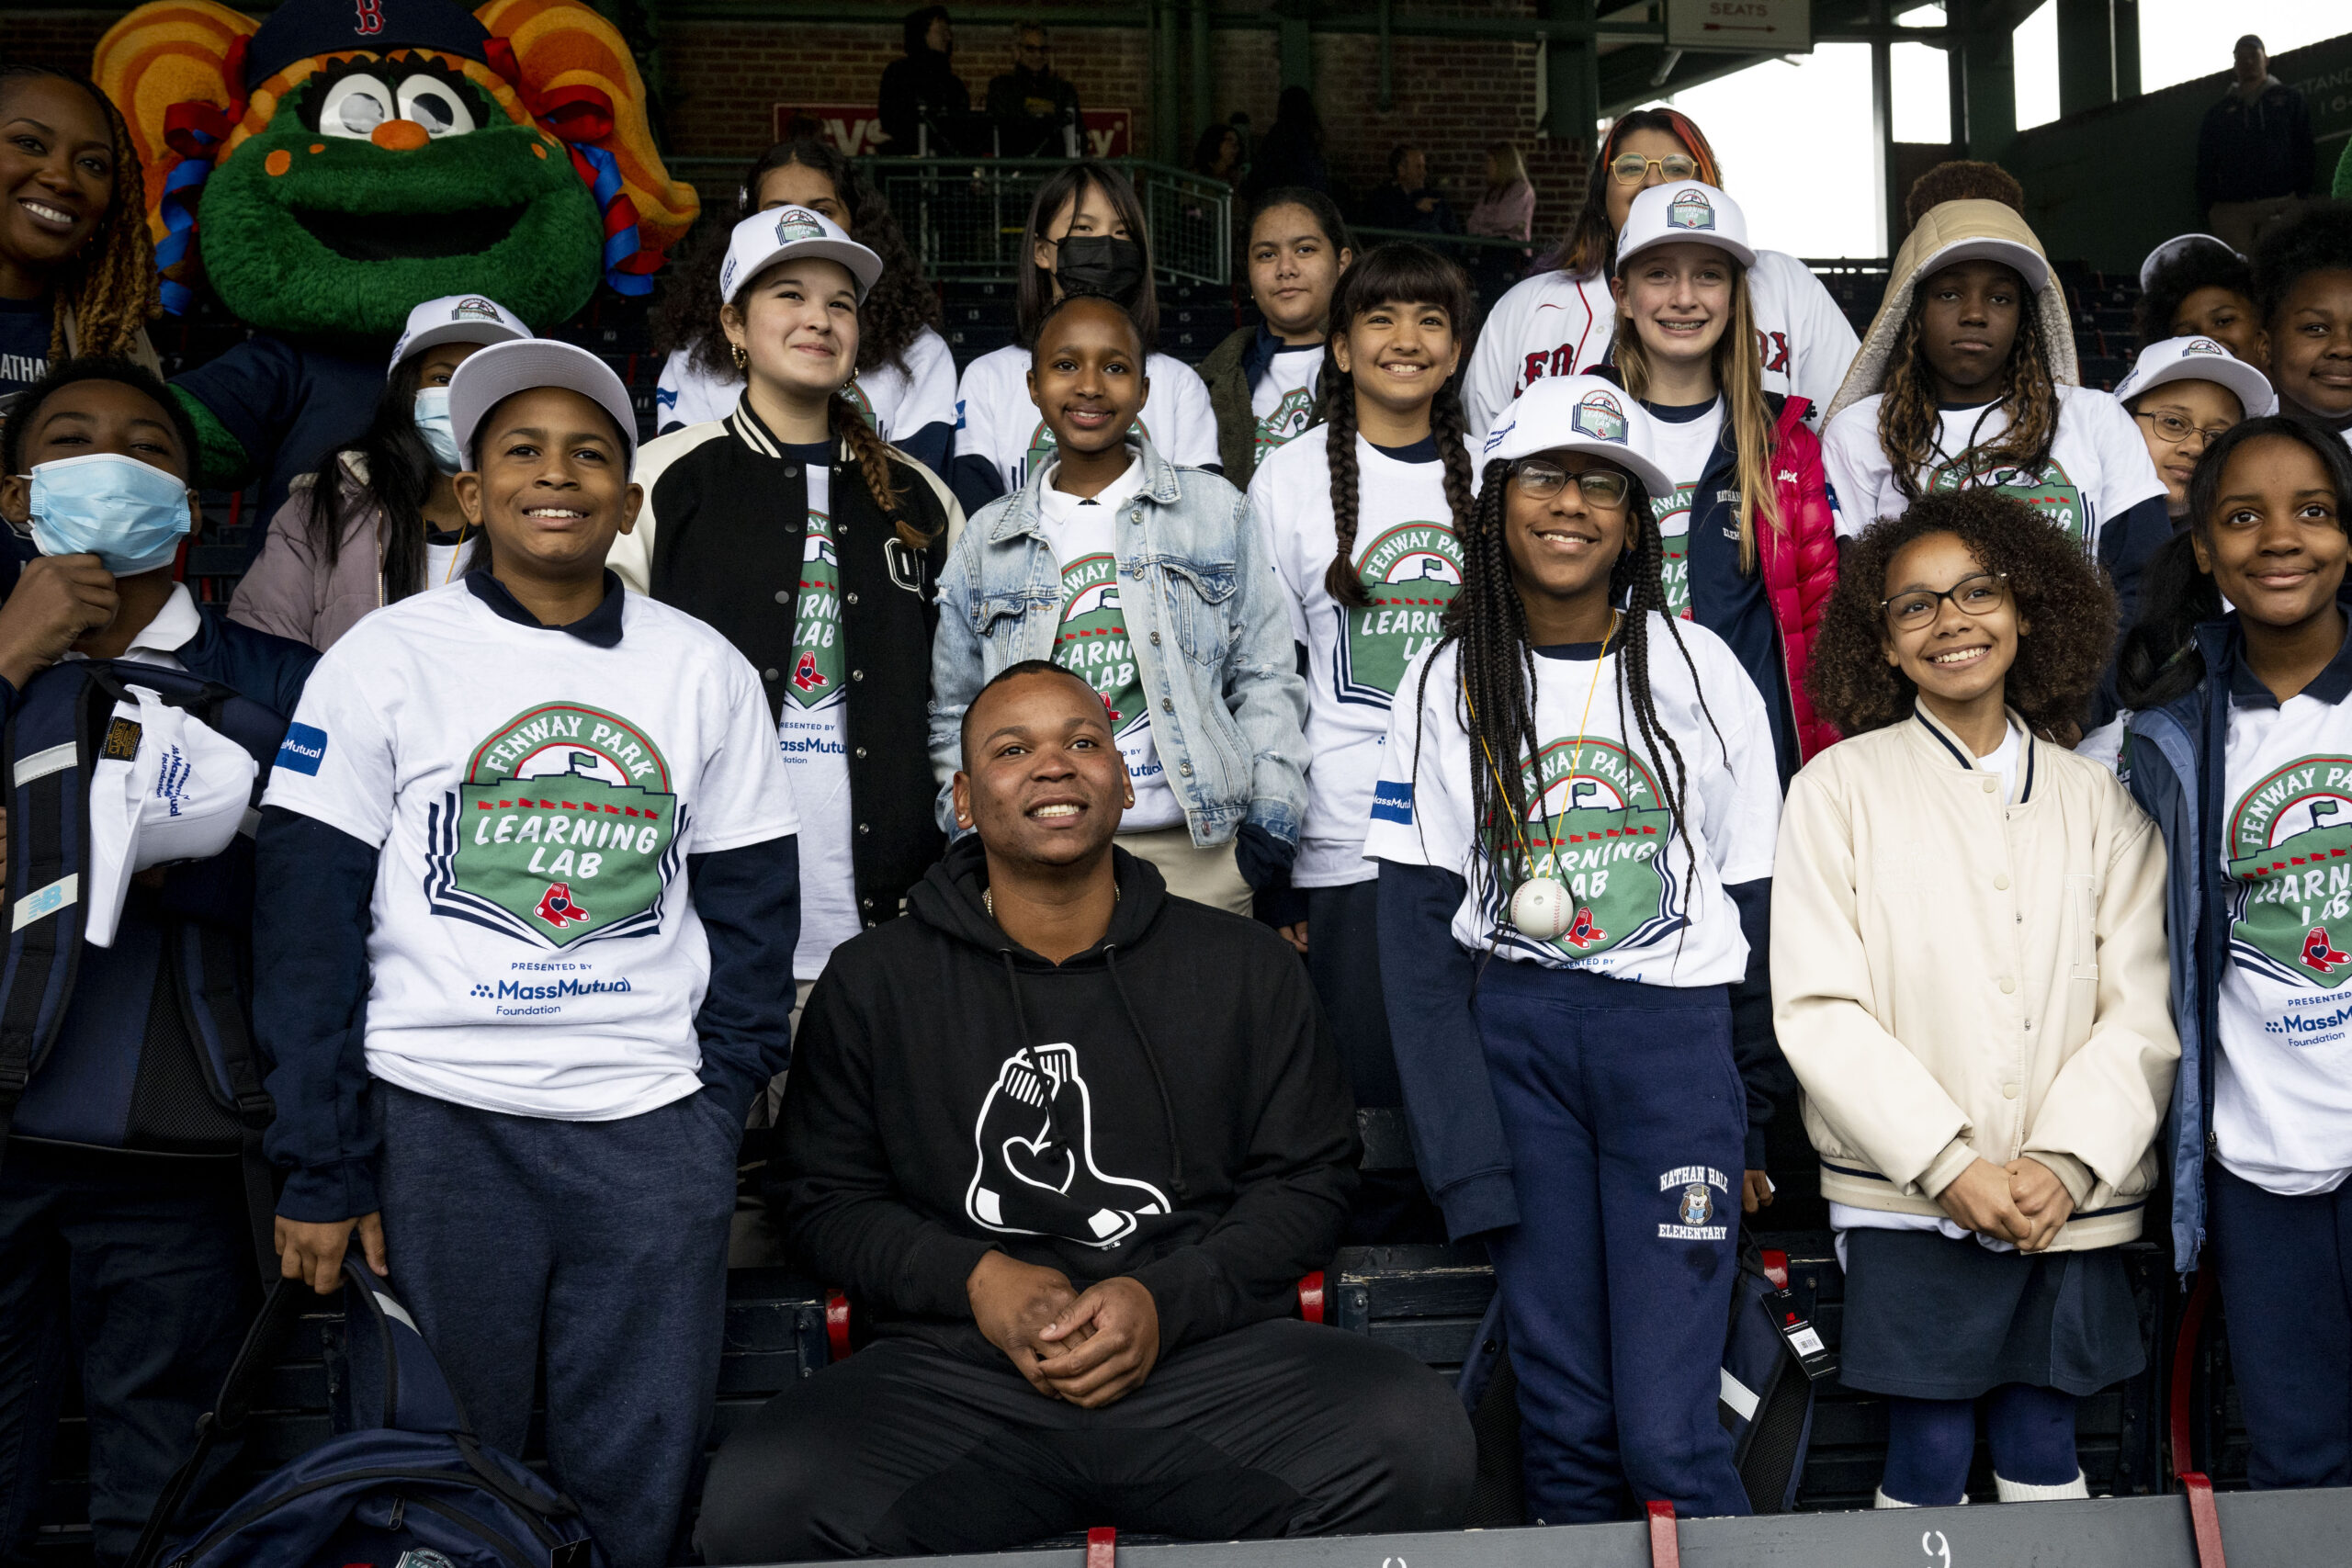 BPS students gain new learning experiences at Fenway Park - The Boston Globe